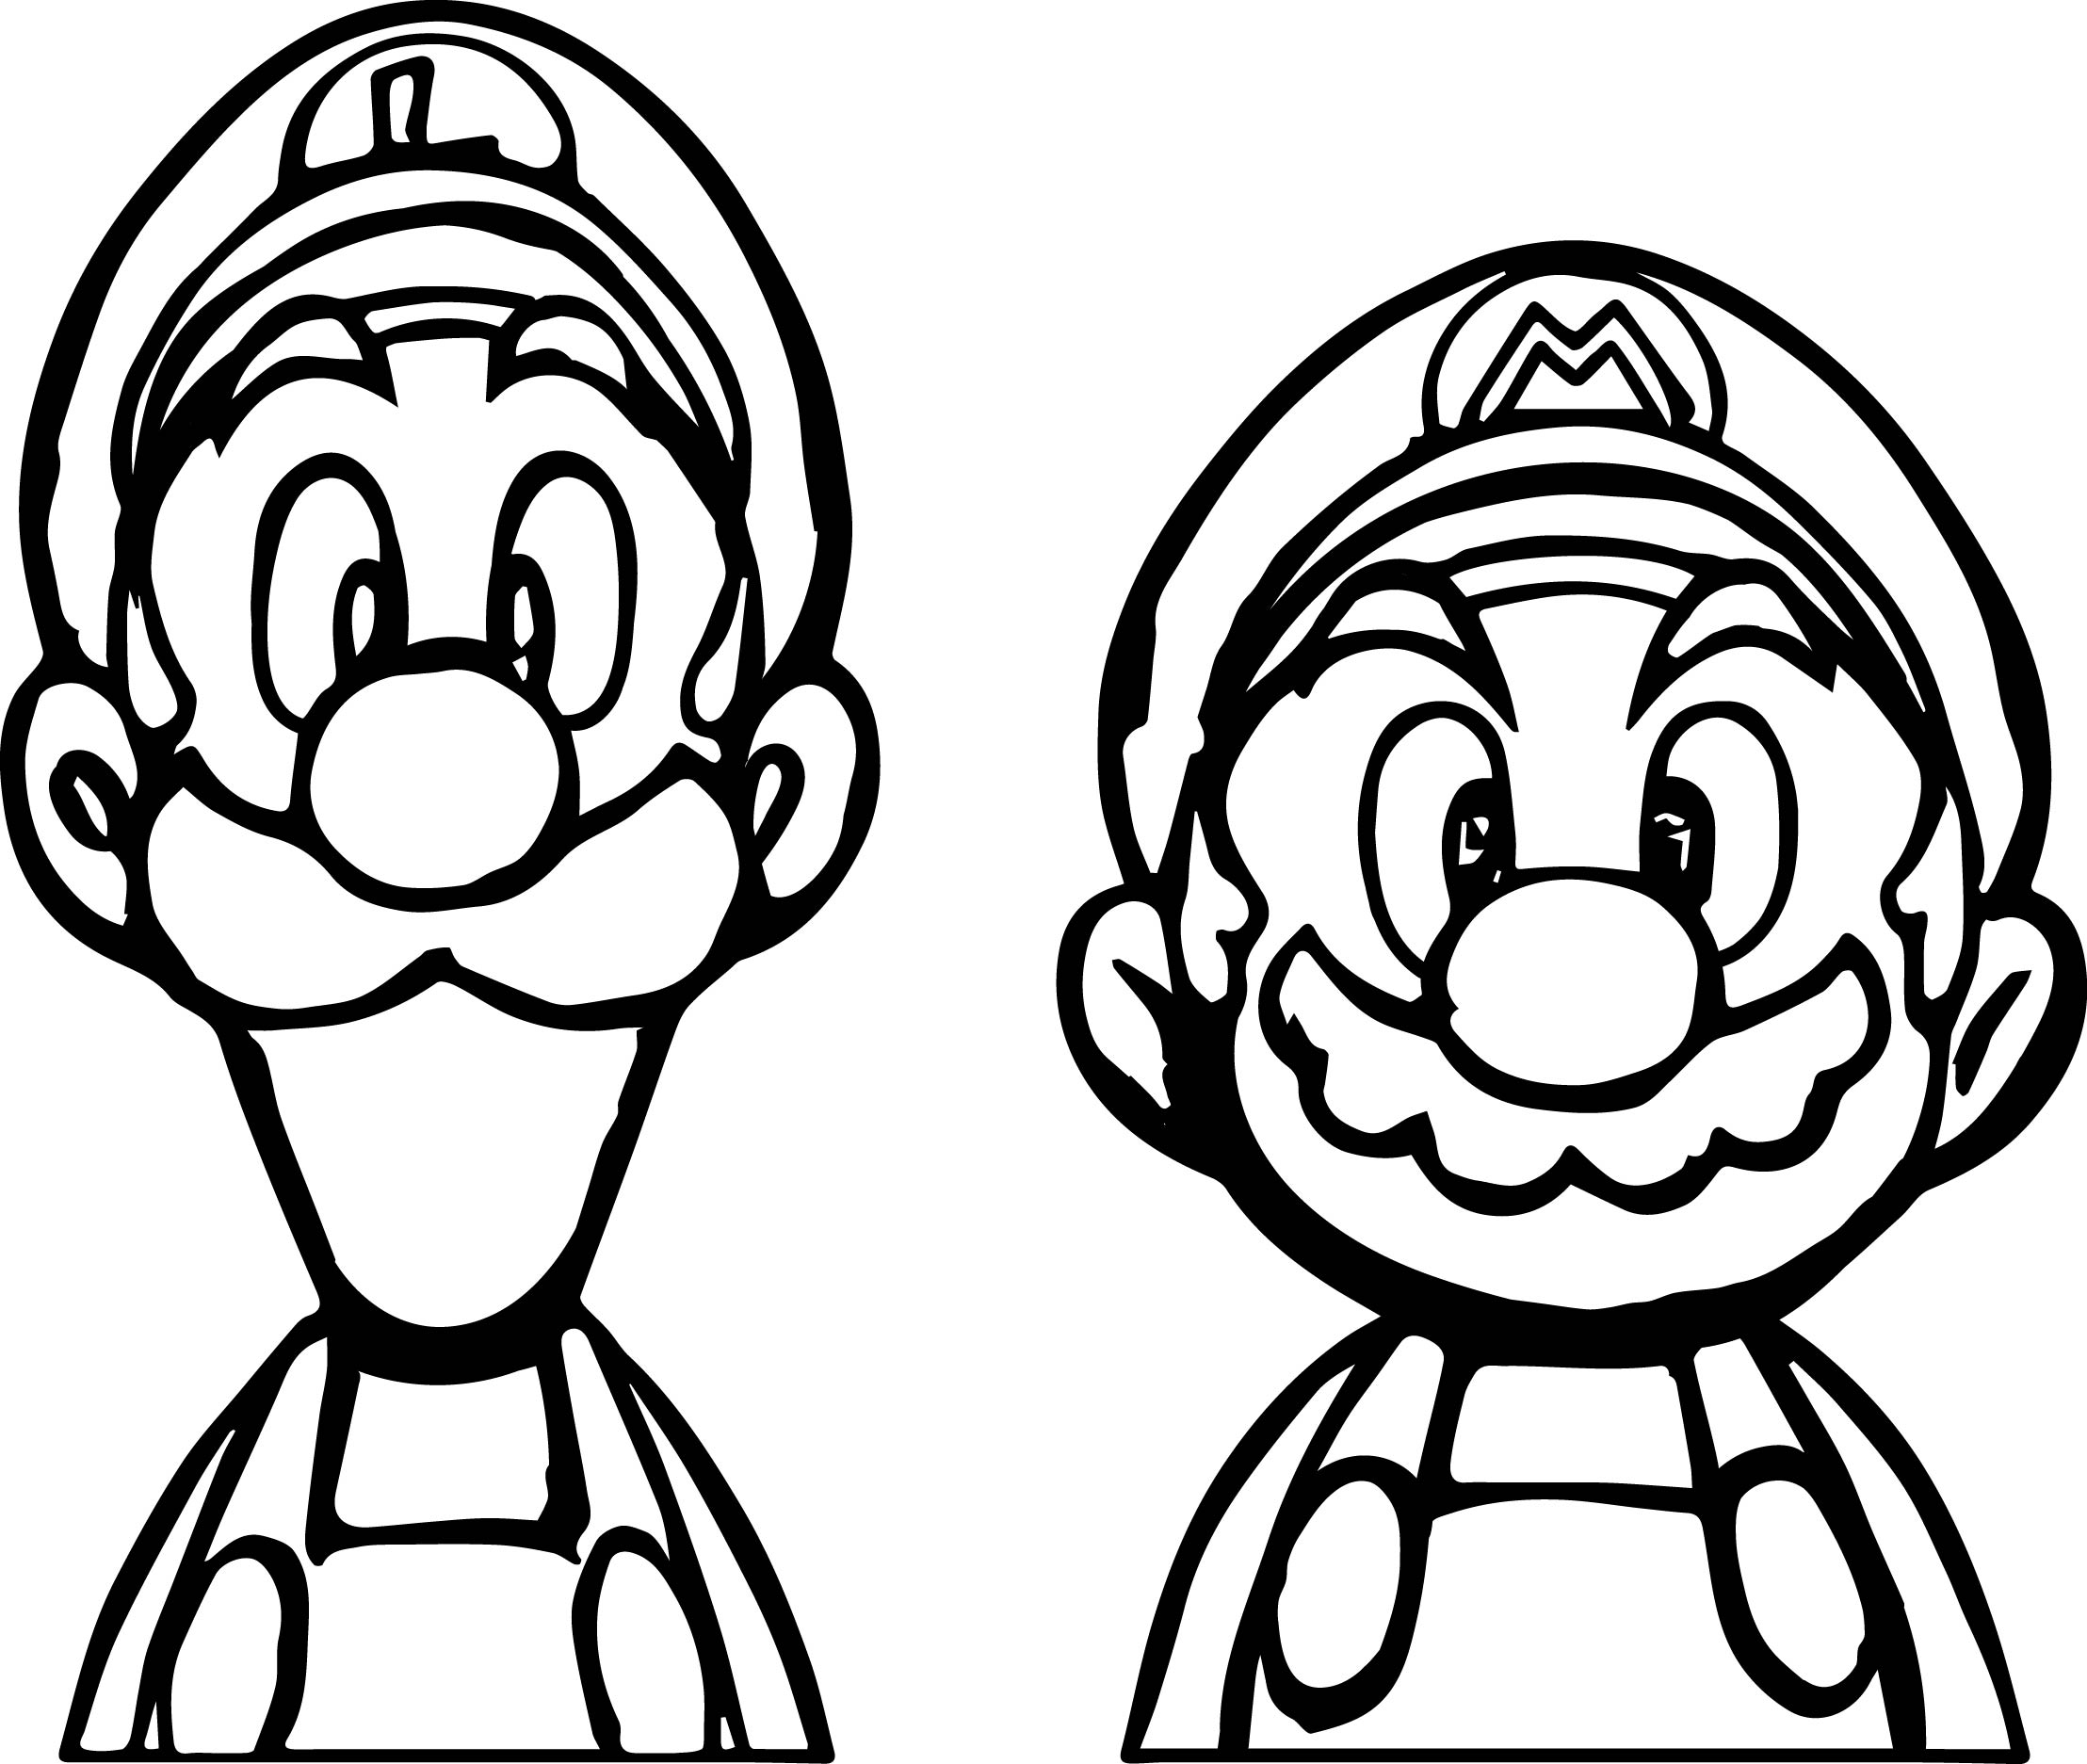 mario-3d-world-coloring-pages-at-getcolorings-free-printable